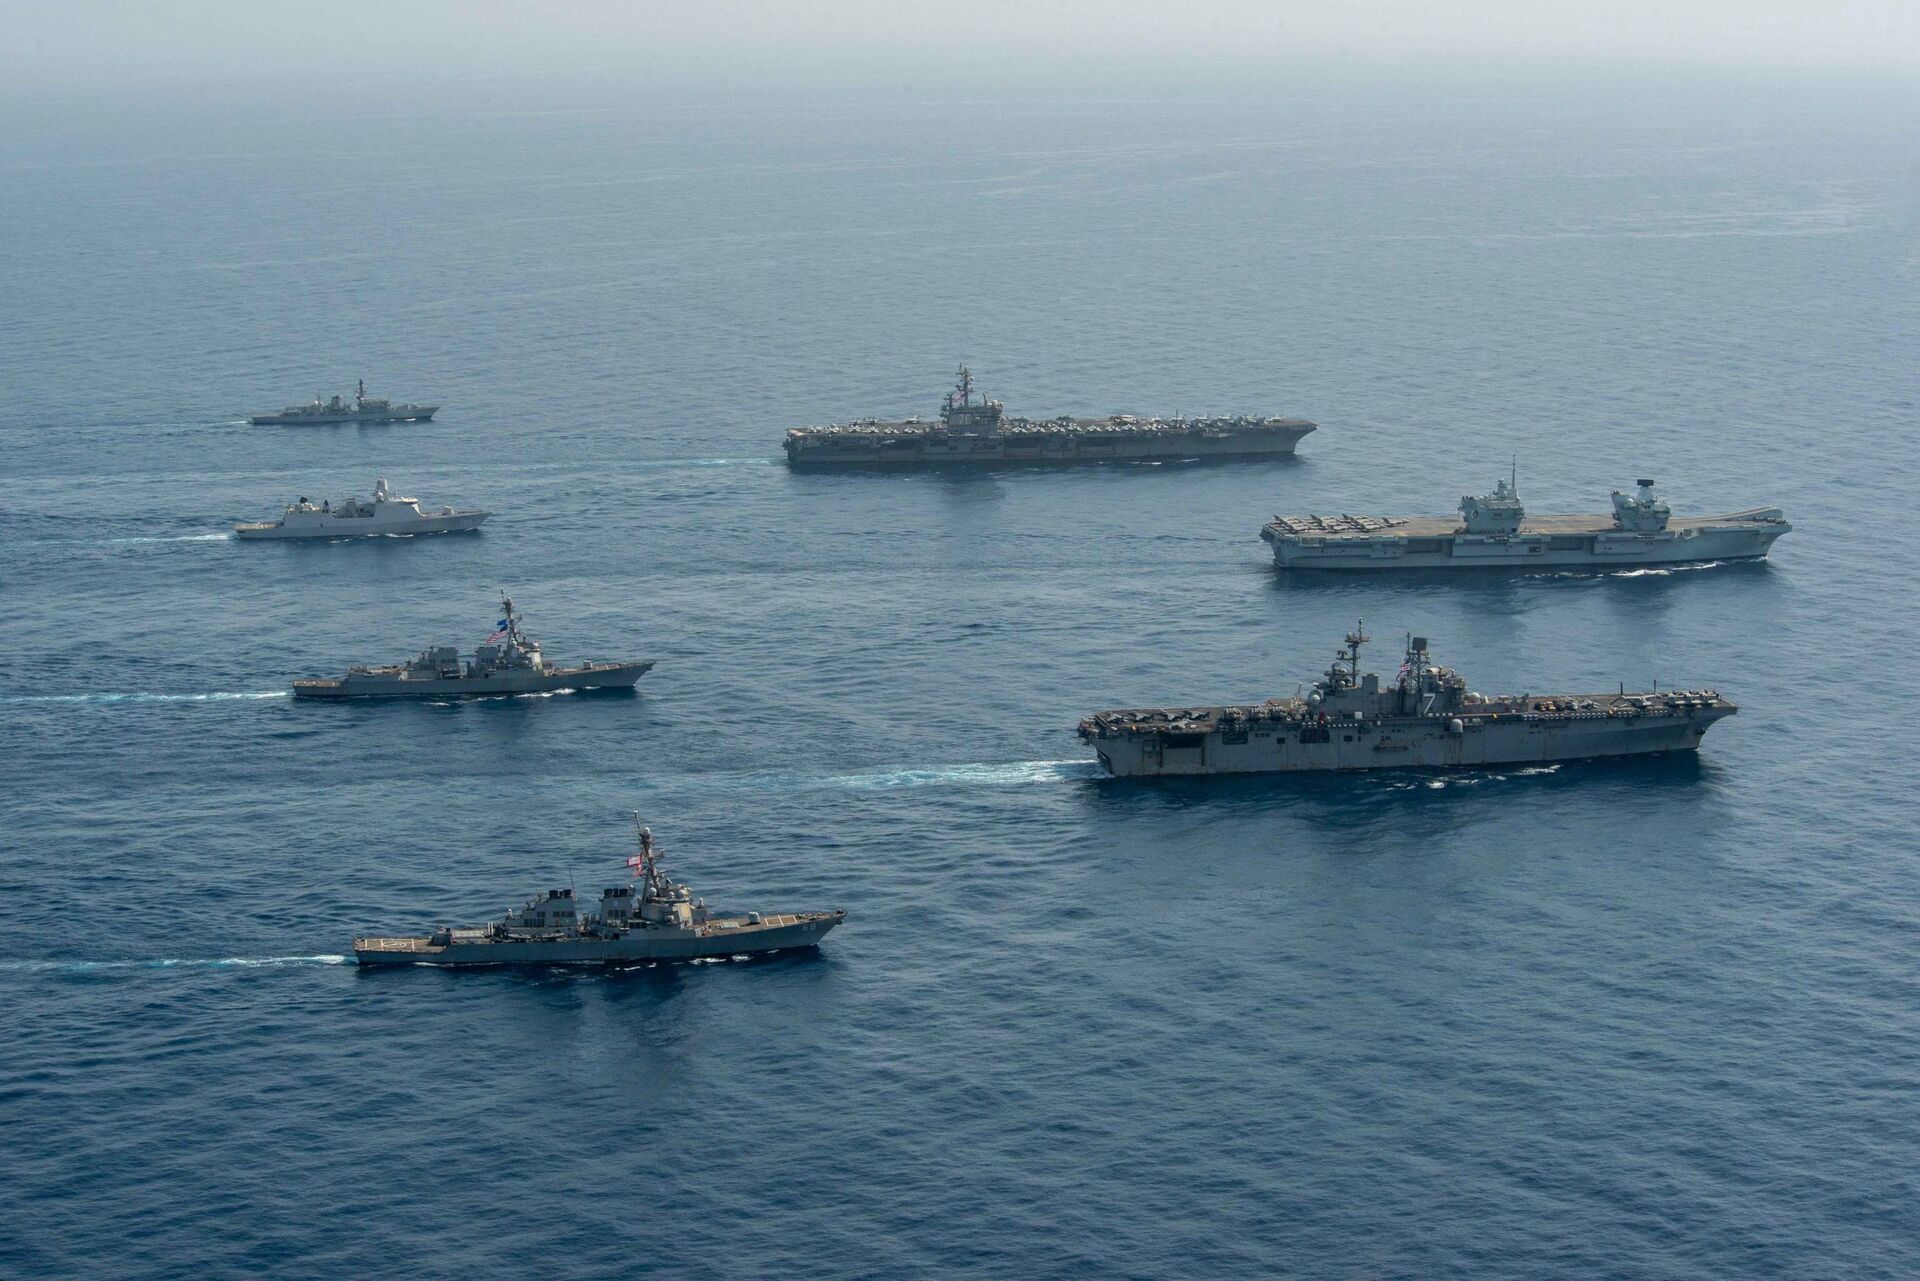 Ships of the UK Carrier Strike Group, USS Ronald Reagan Carrier Strike Group, and Iwo Jima Amphibious Ready Group operate in formation in the Gulf of Aden, July 12. - Sputnik International, 1920, 07.09.2021